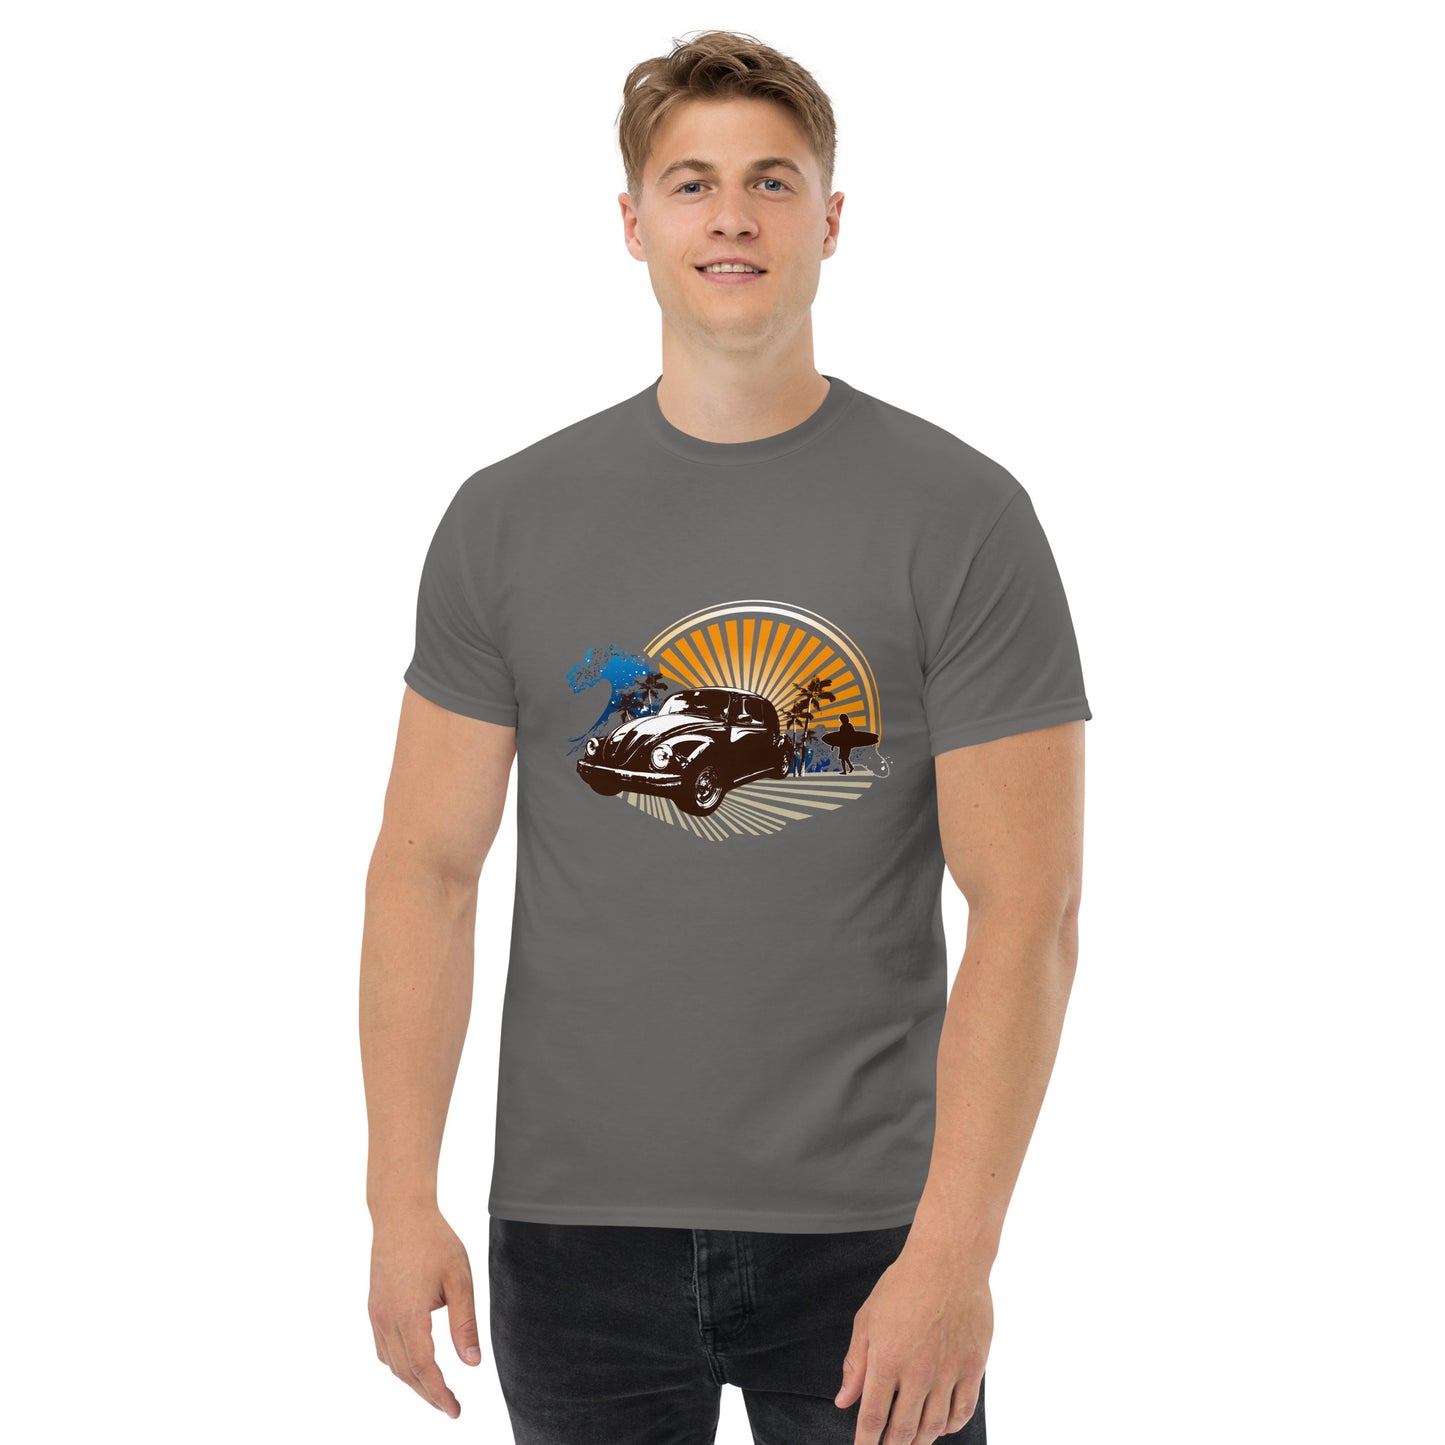 Men with grey t-shirt with sunset and beetle car